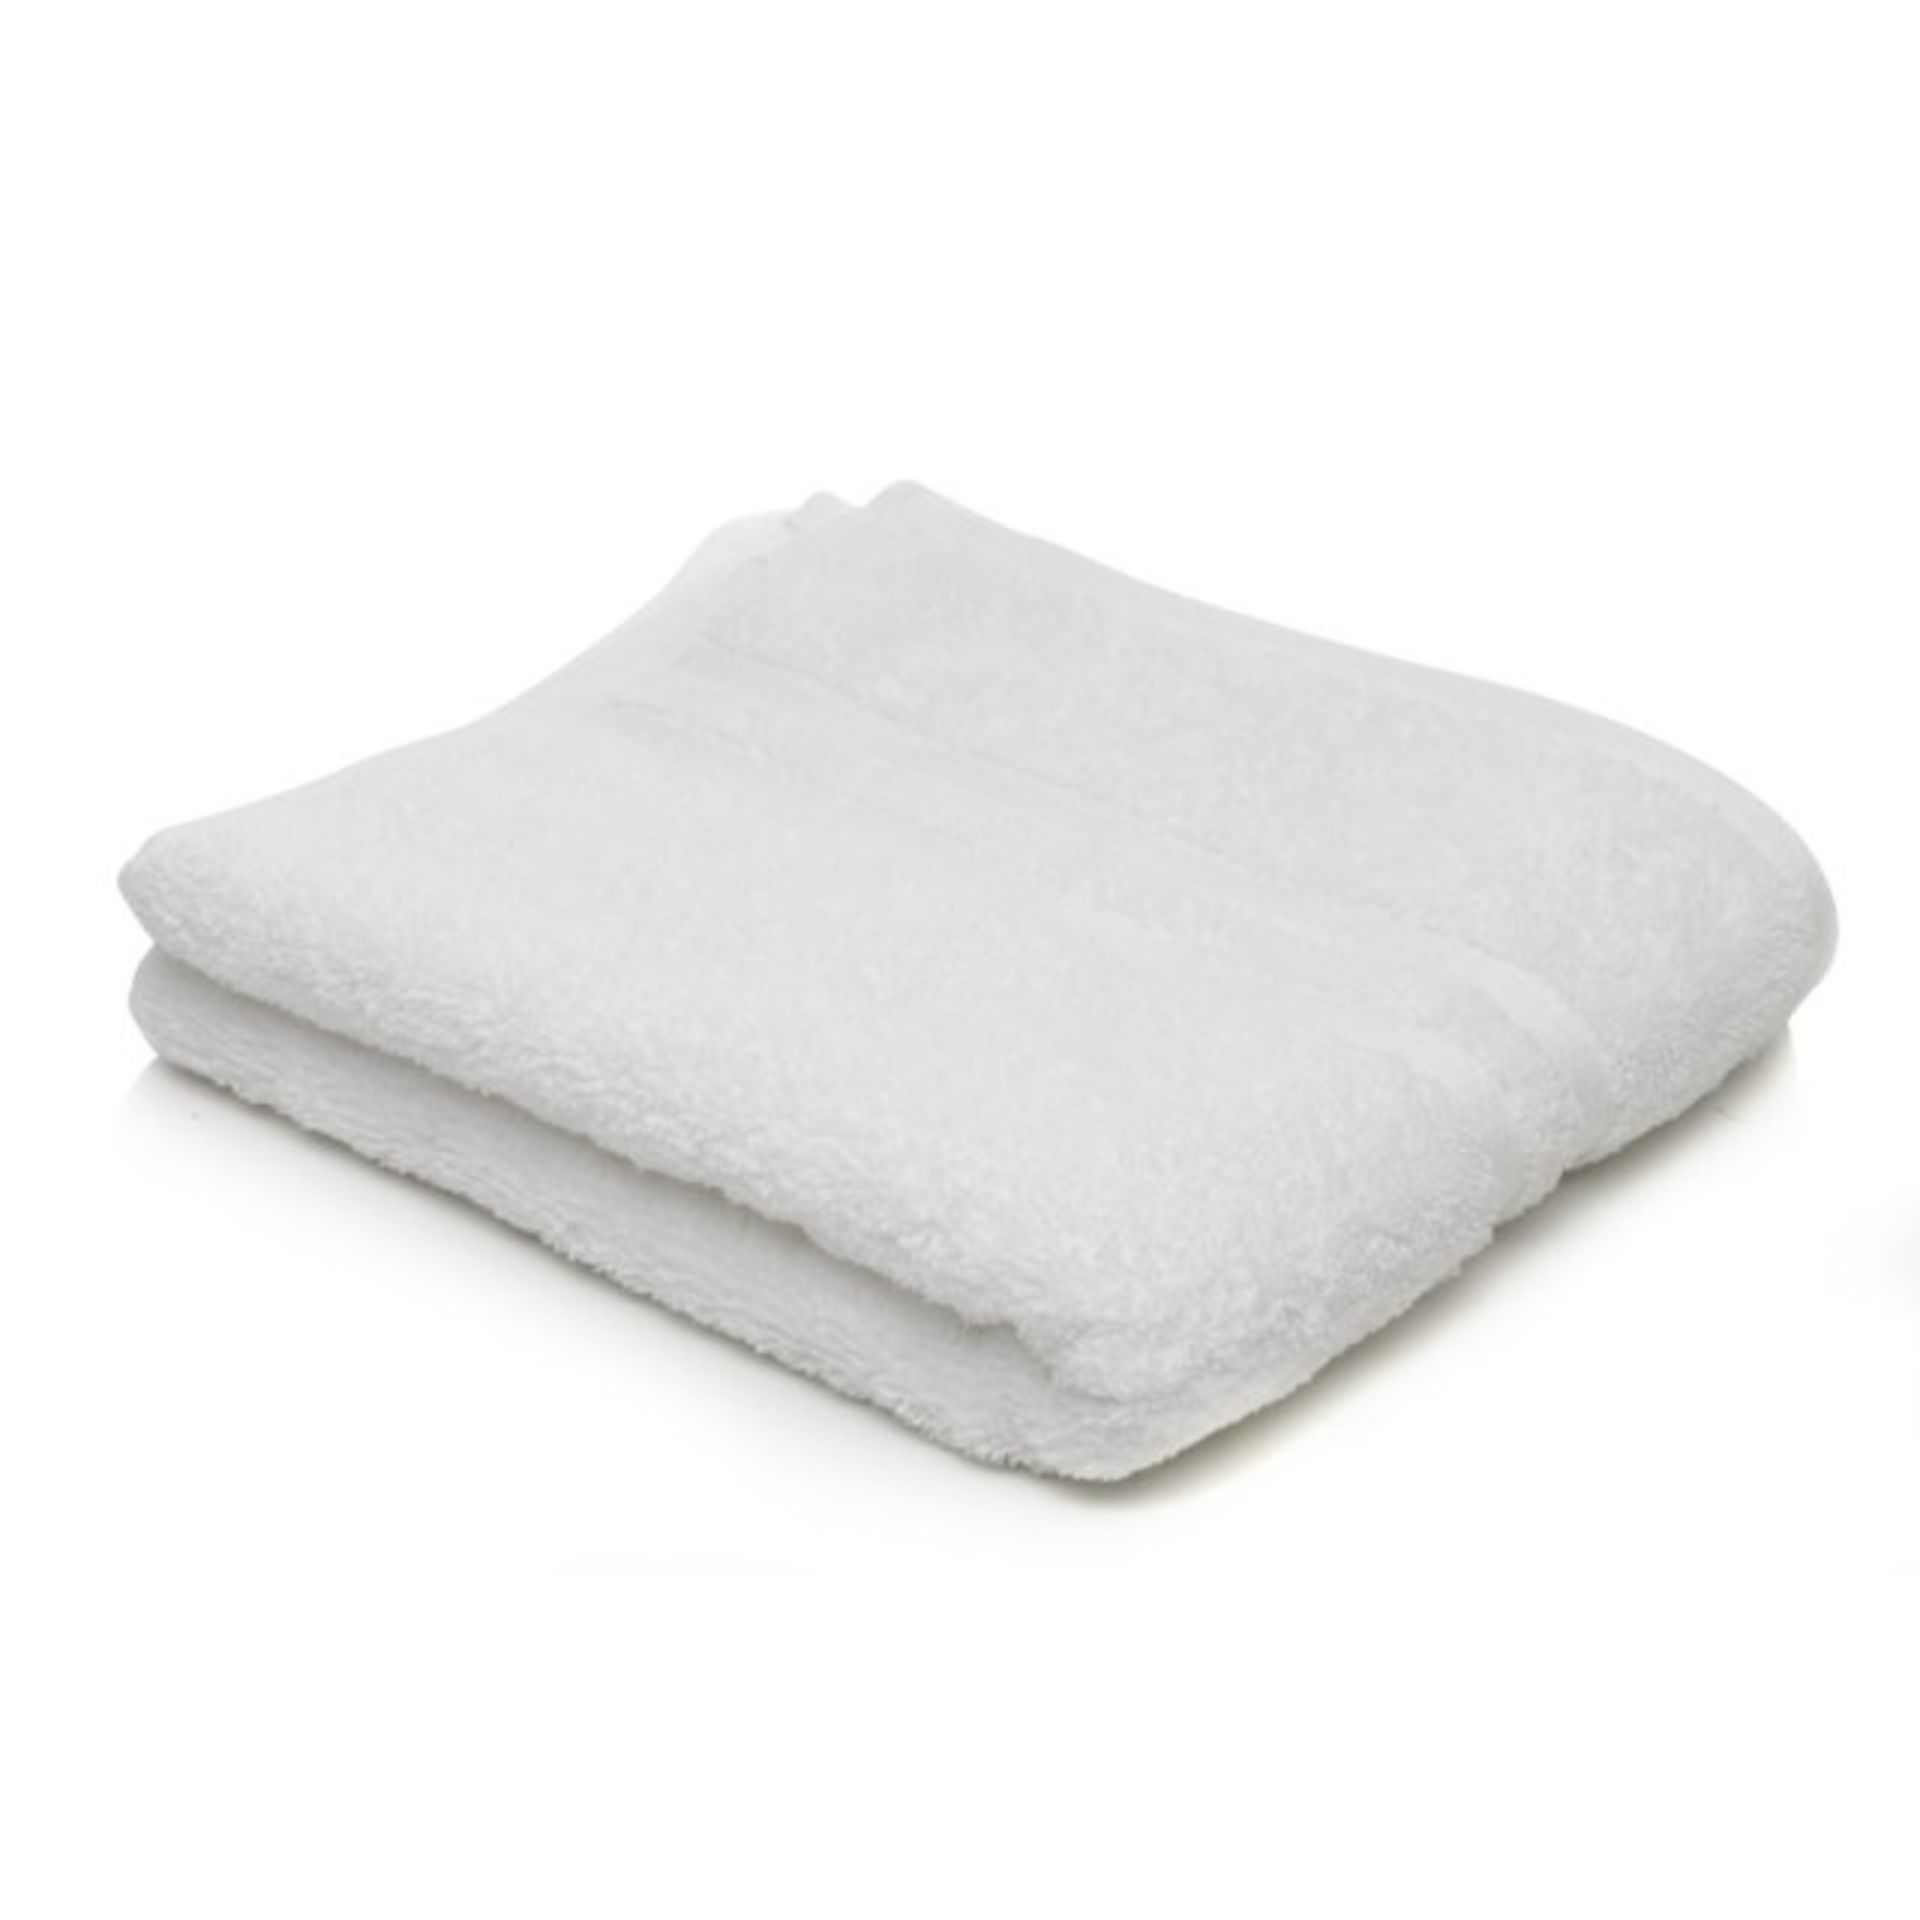 V *TRADE QTY* Brand New Hotel Quality Large Cotton Bath Sheet X 18 YOUR BID PRICE TO BE MULTIPLIED